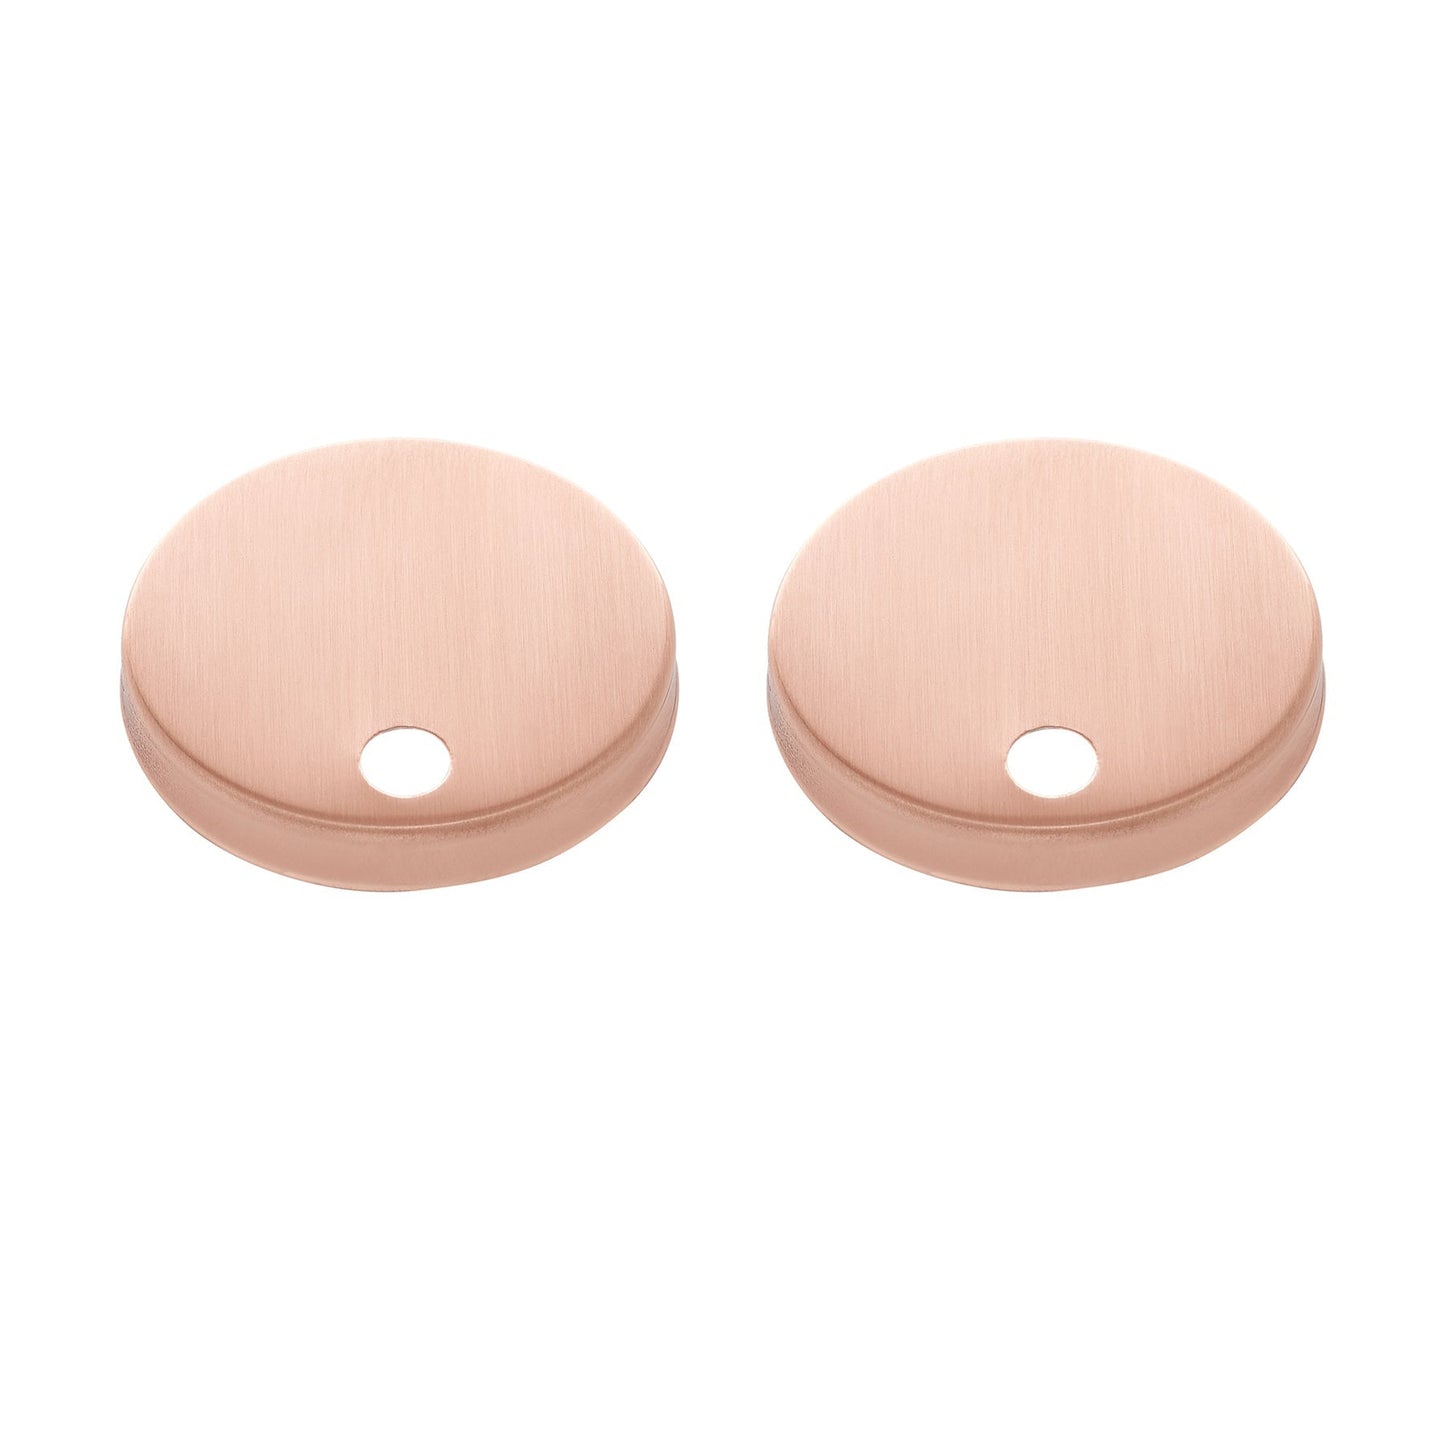 Swiss Madison Round Rose Gold Toilet Push Buttons With QQ Feet For SM-1T803